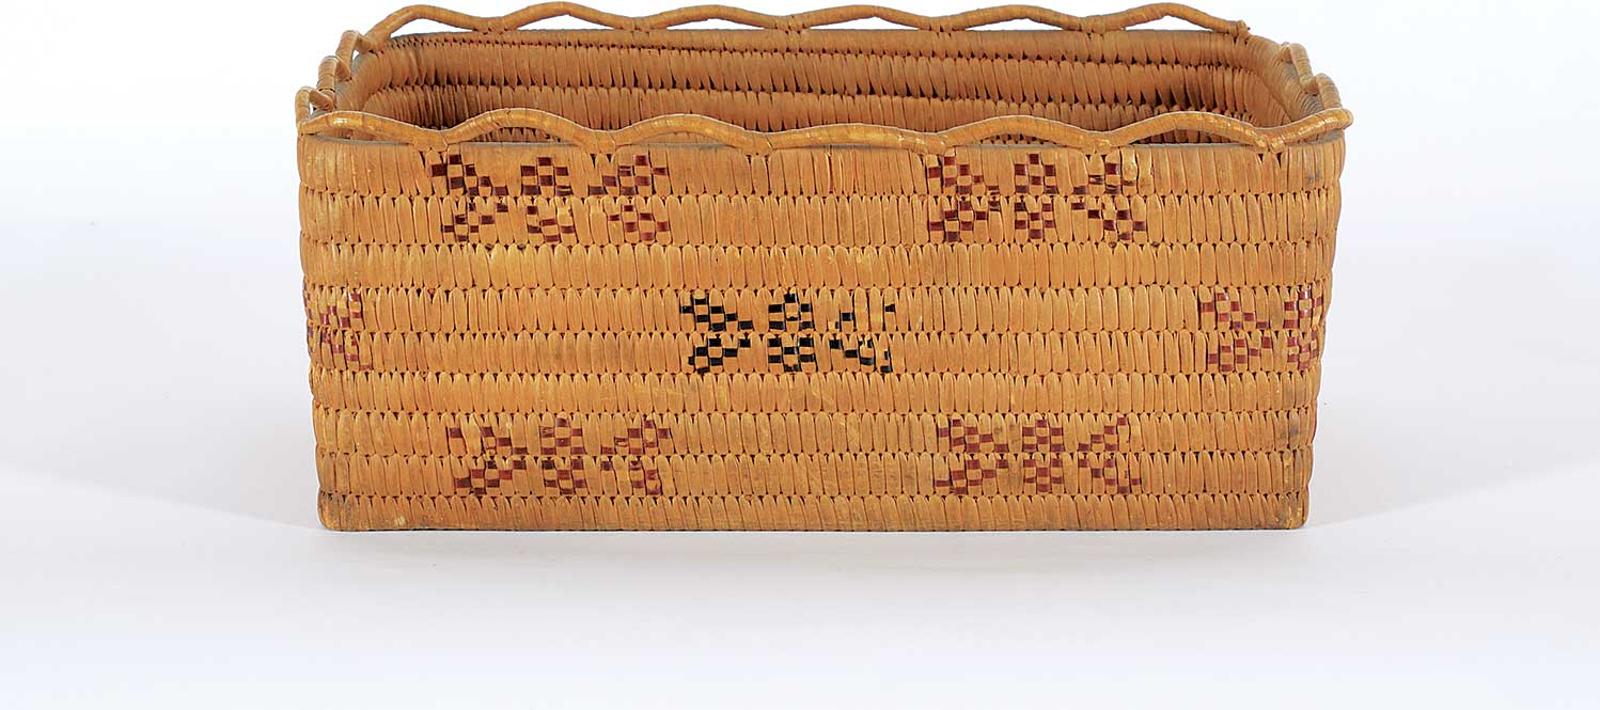 Northwest Coast First Nations School - Square Basket with Butterfly Pattern